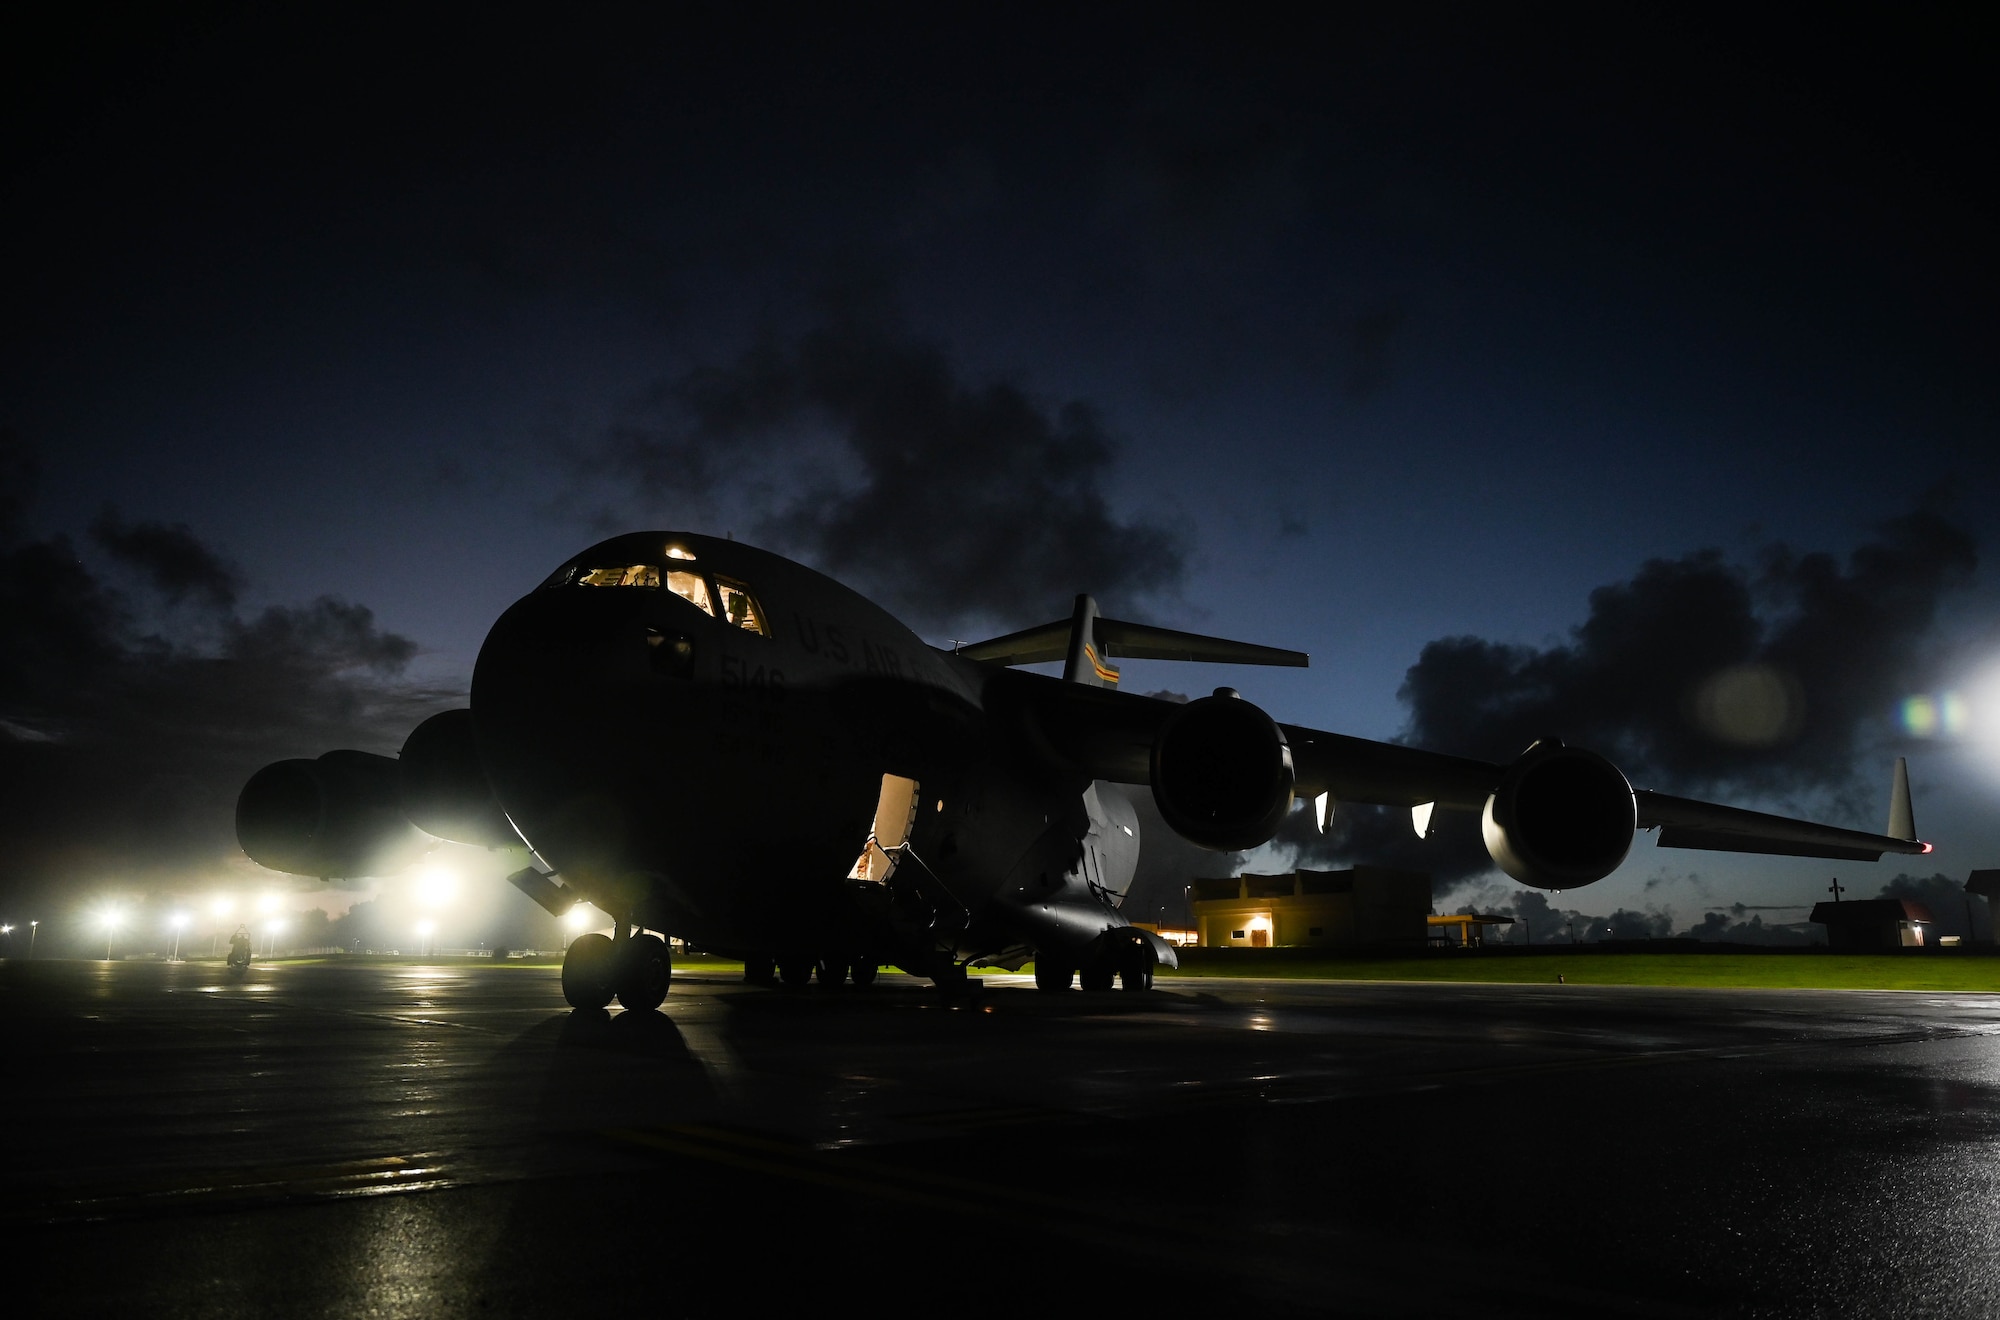 A C-17A Globemaster III, assigned to Joint Base Pearl Harbor-Hickam, Hawaii, sits on the flightline during preflight checks at Andersen Air Force Base, Guam, Nov. 14, 2021. The JBPHH aircrew participated in a training exercise with two C-17s assigned to the Royal Australian Air Force, enhancing joint operation capabilities in the Indo-Pacific. (U.S. Air Force photo by Staff Sgt. Alan Ricker)